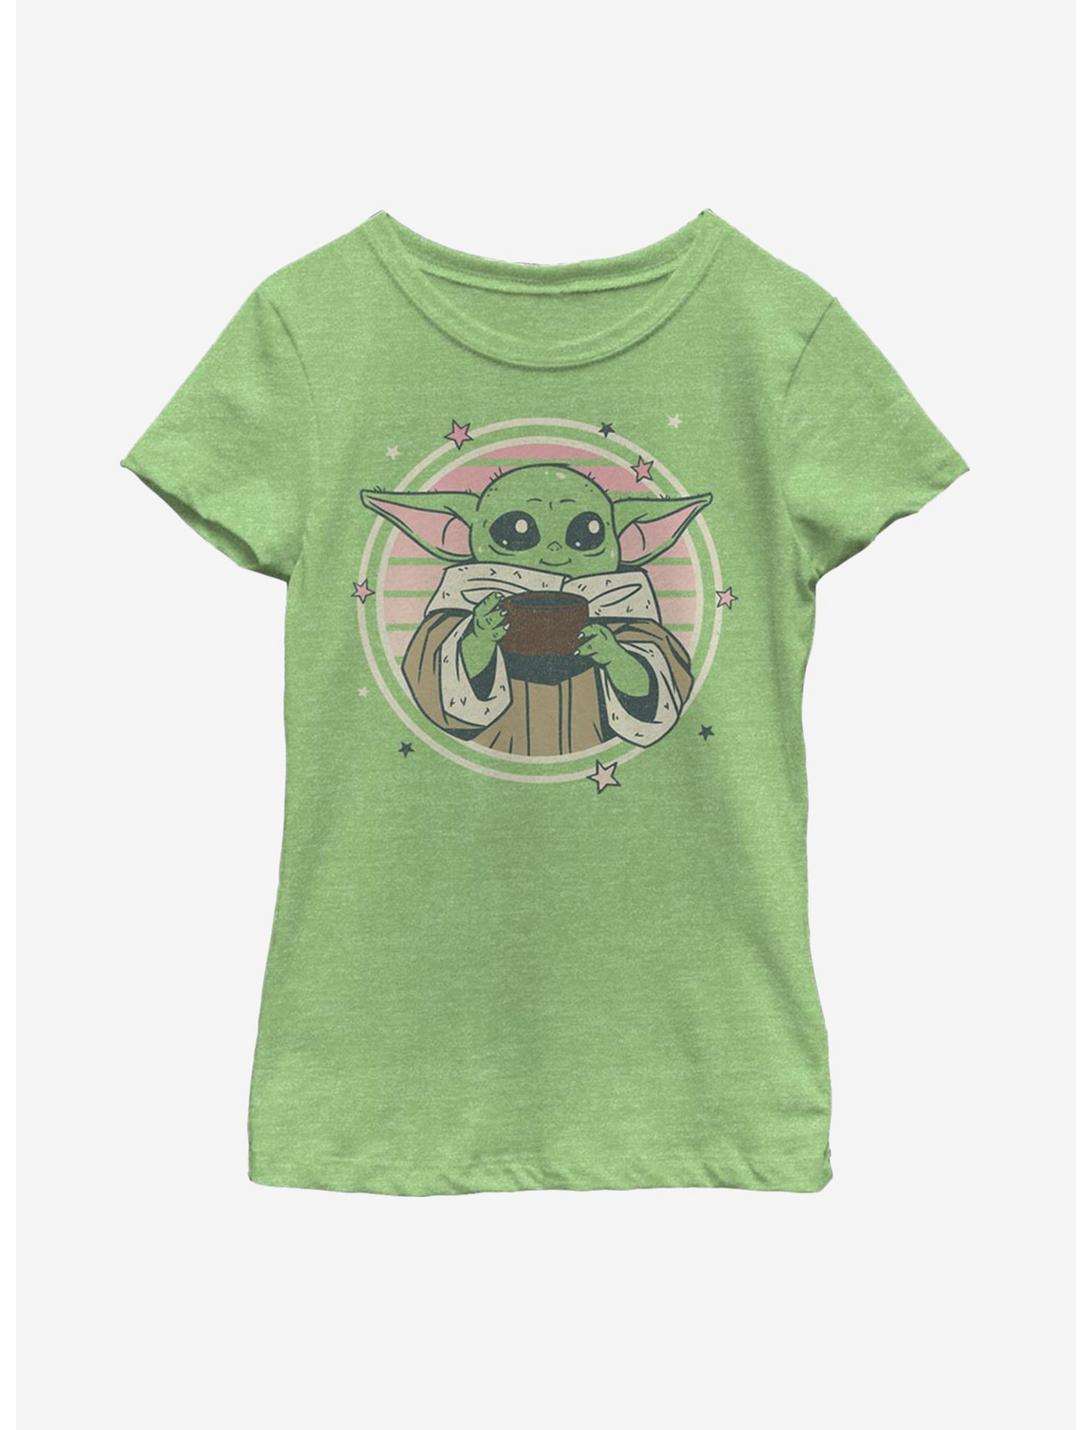 Plus Size Star Wars The Mandalorian The Child Starry Eyes Youth Girls T-Shirt, , hi-res